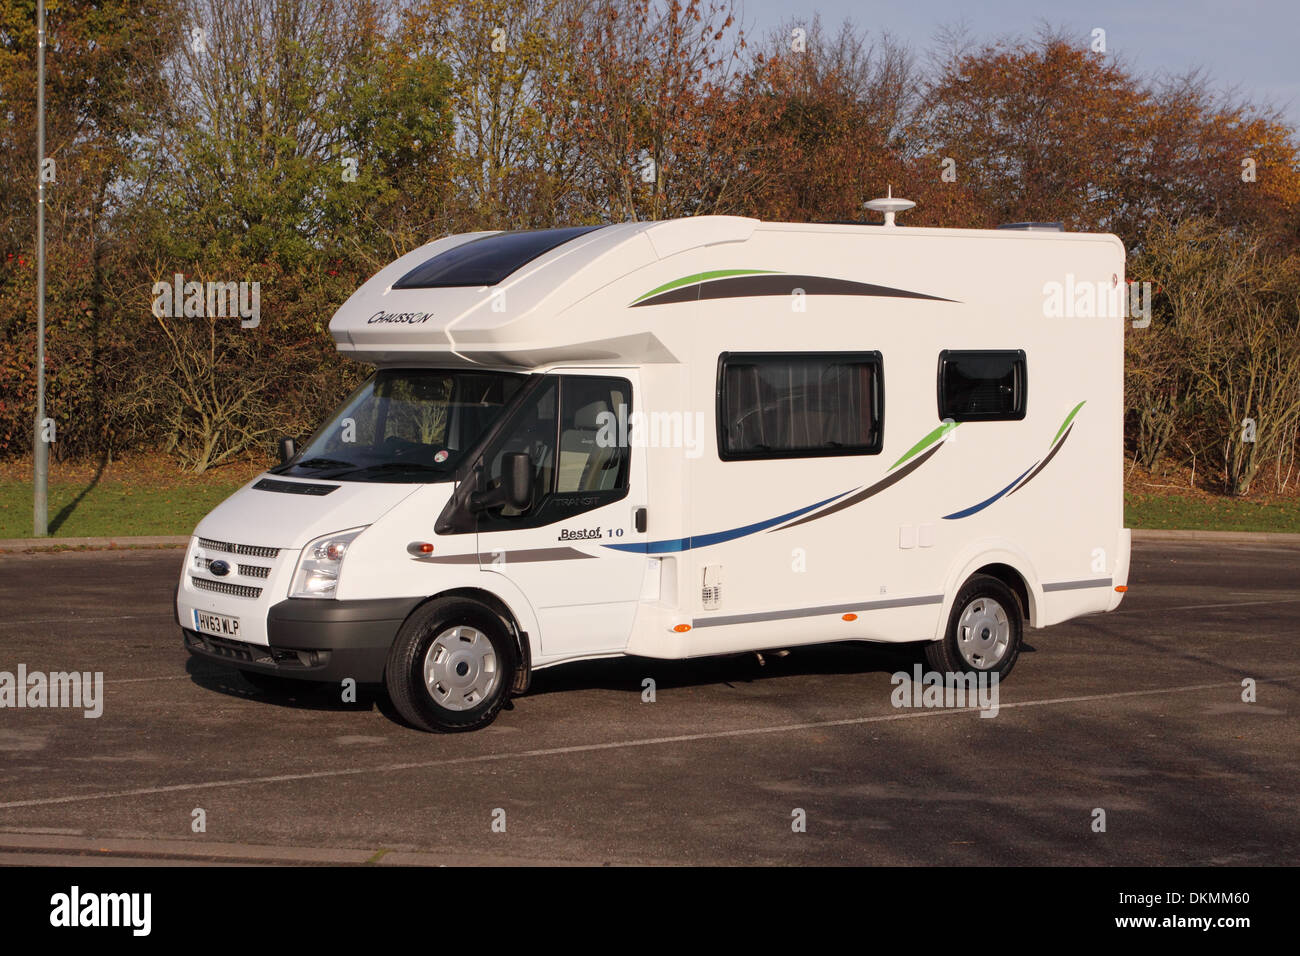 Chausson Transit Flash "Best of 10" motorhome 2013 model vehicle uses a Ford  Transit chassis Stock Photo - Alamy